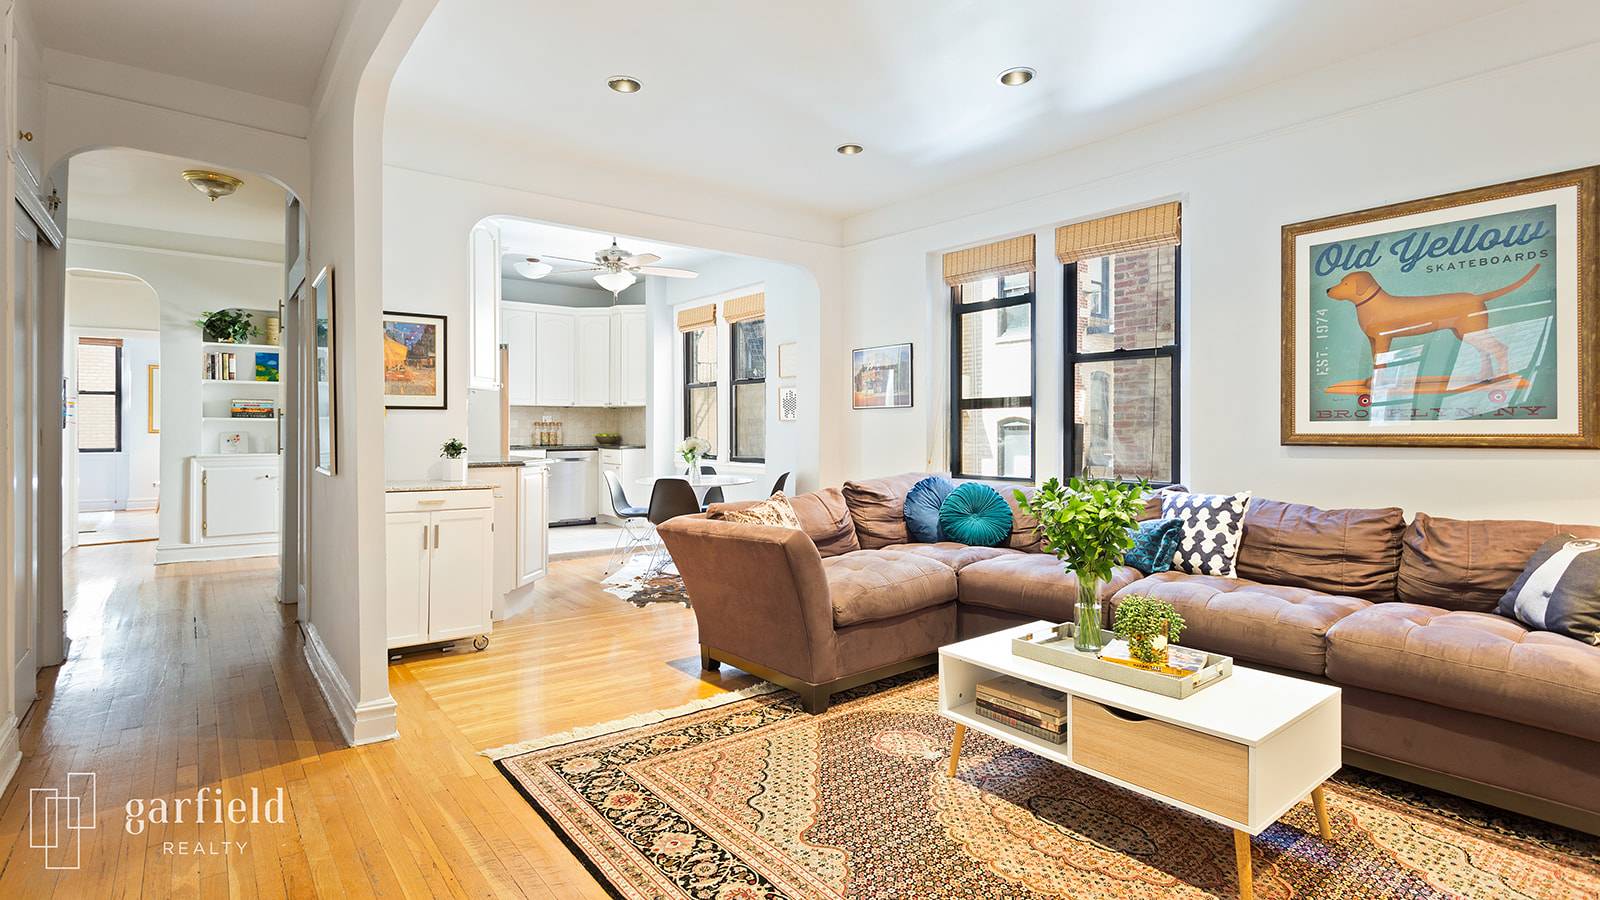 Fifteen windows illuminate this bright, expansive, and inviting home, which offers a lovely renovation and comfortable lifestyle on the 3rd floor of a well maintained elevator building on 8th Avenue ...